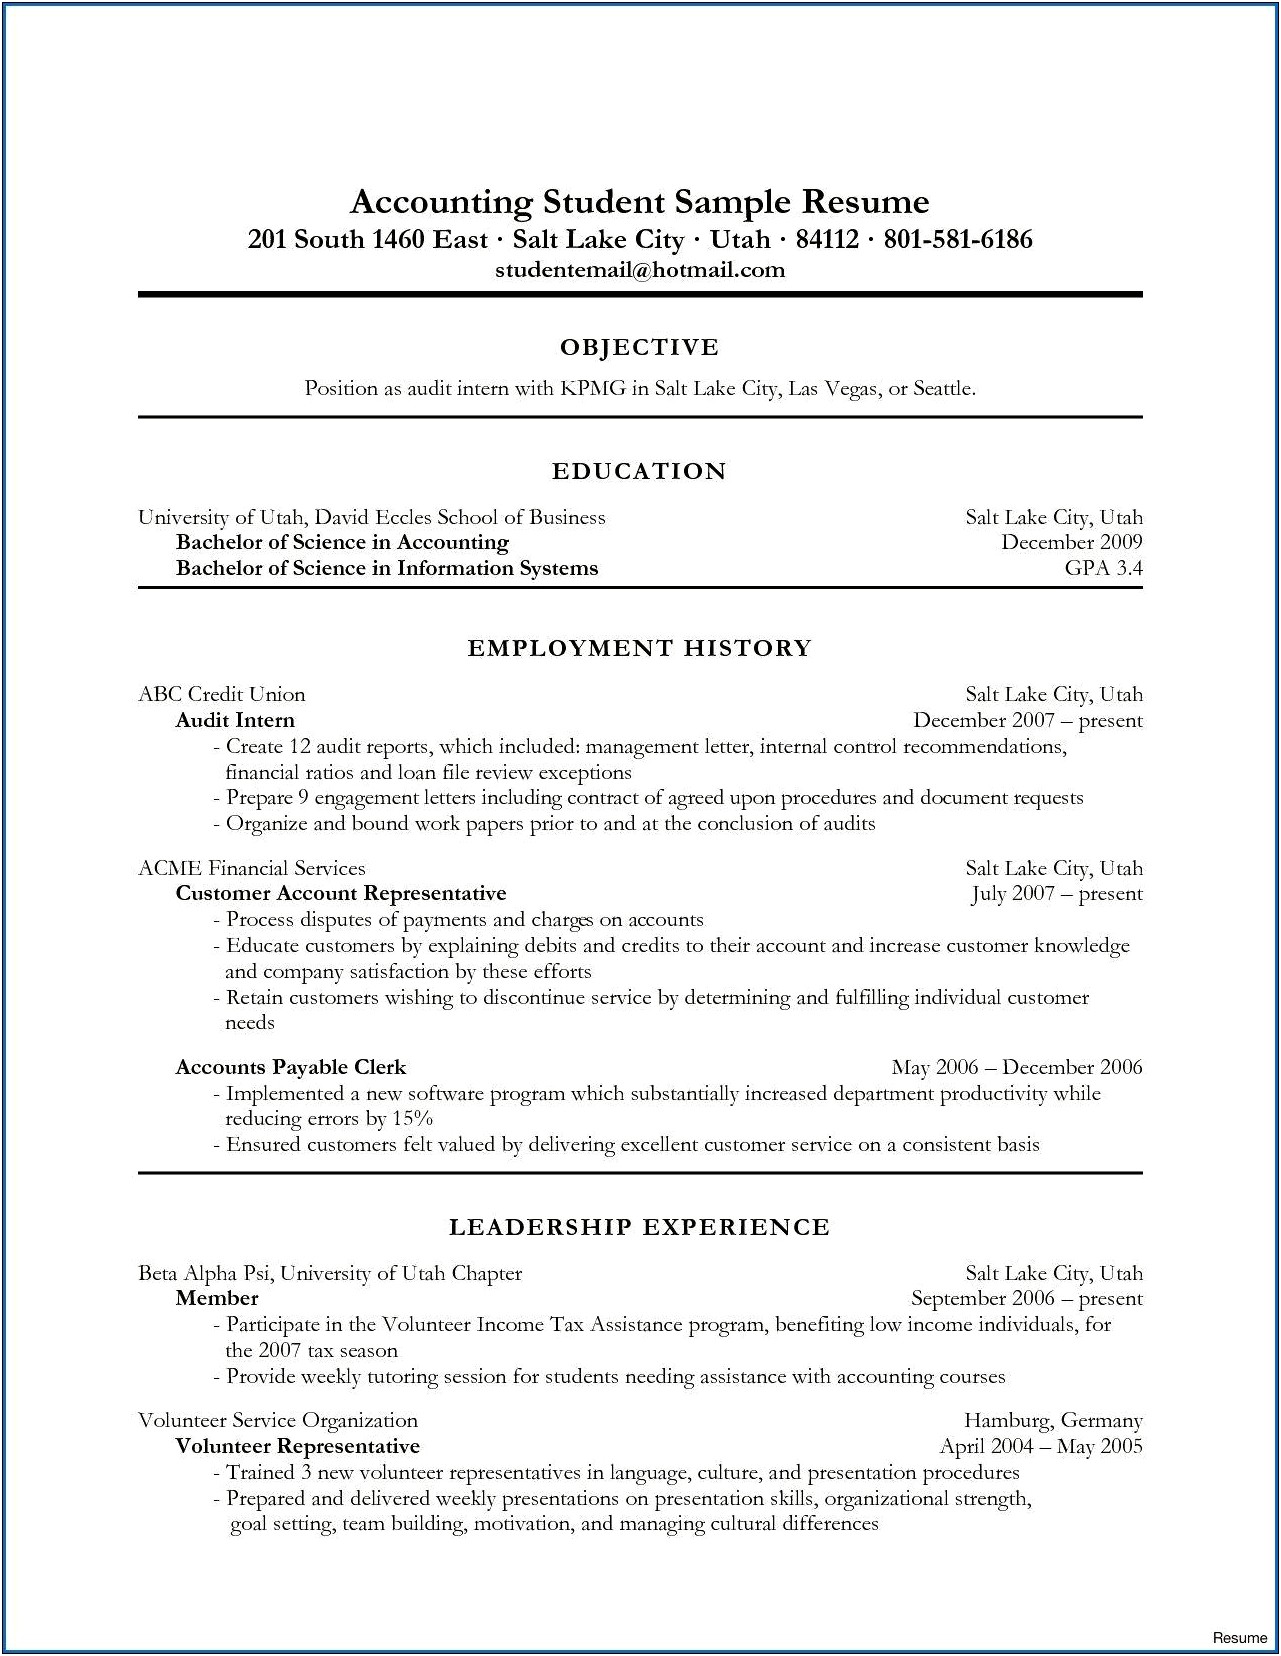 Objective Statement For Resume Financial Services